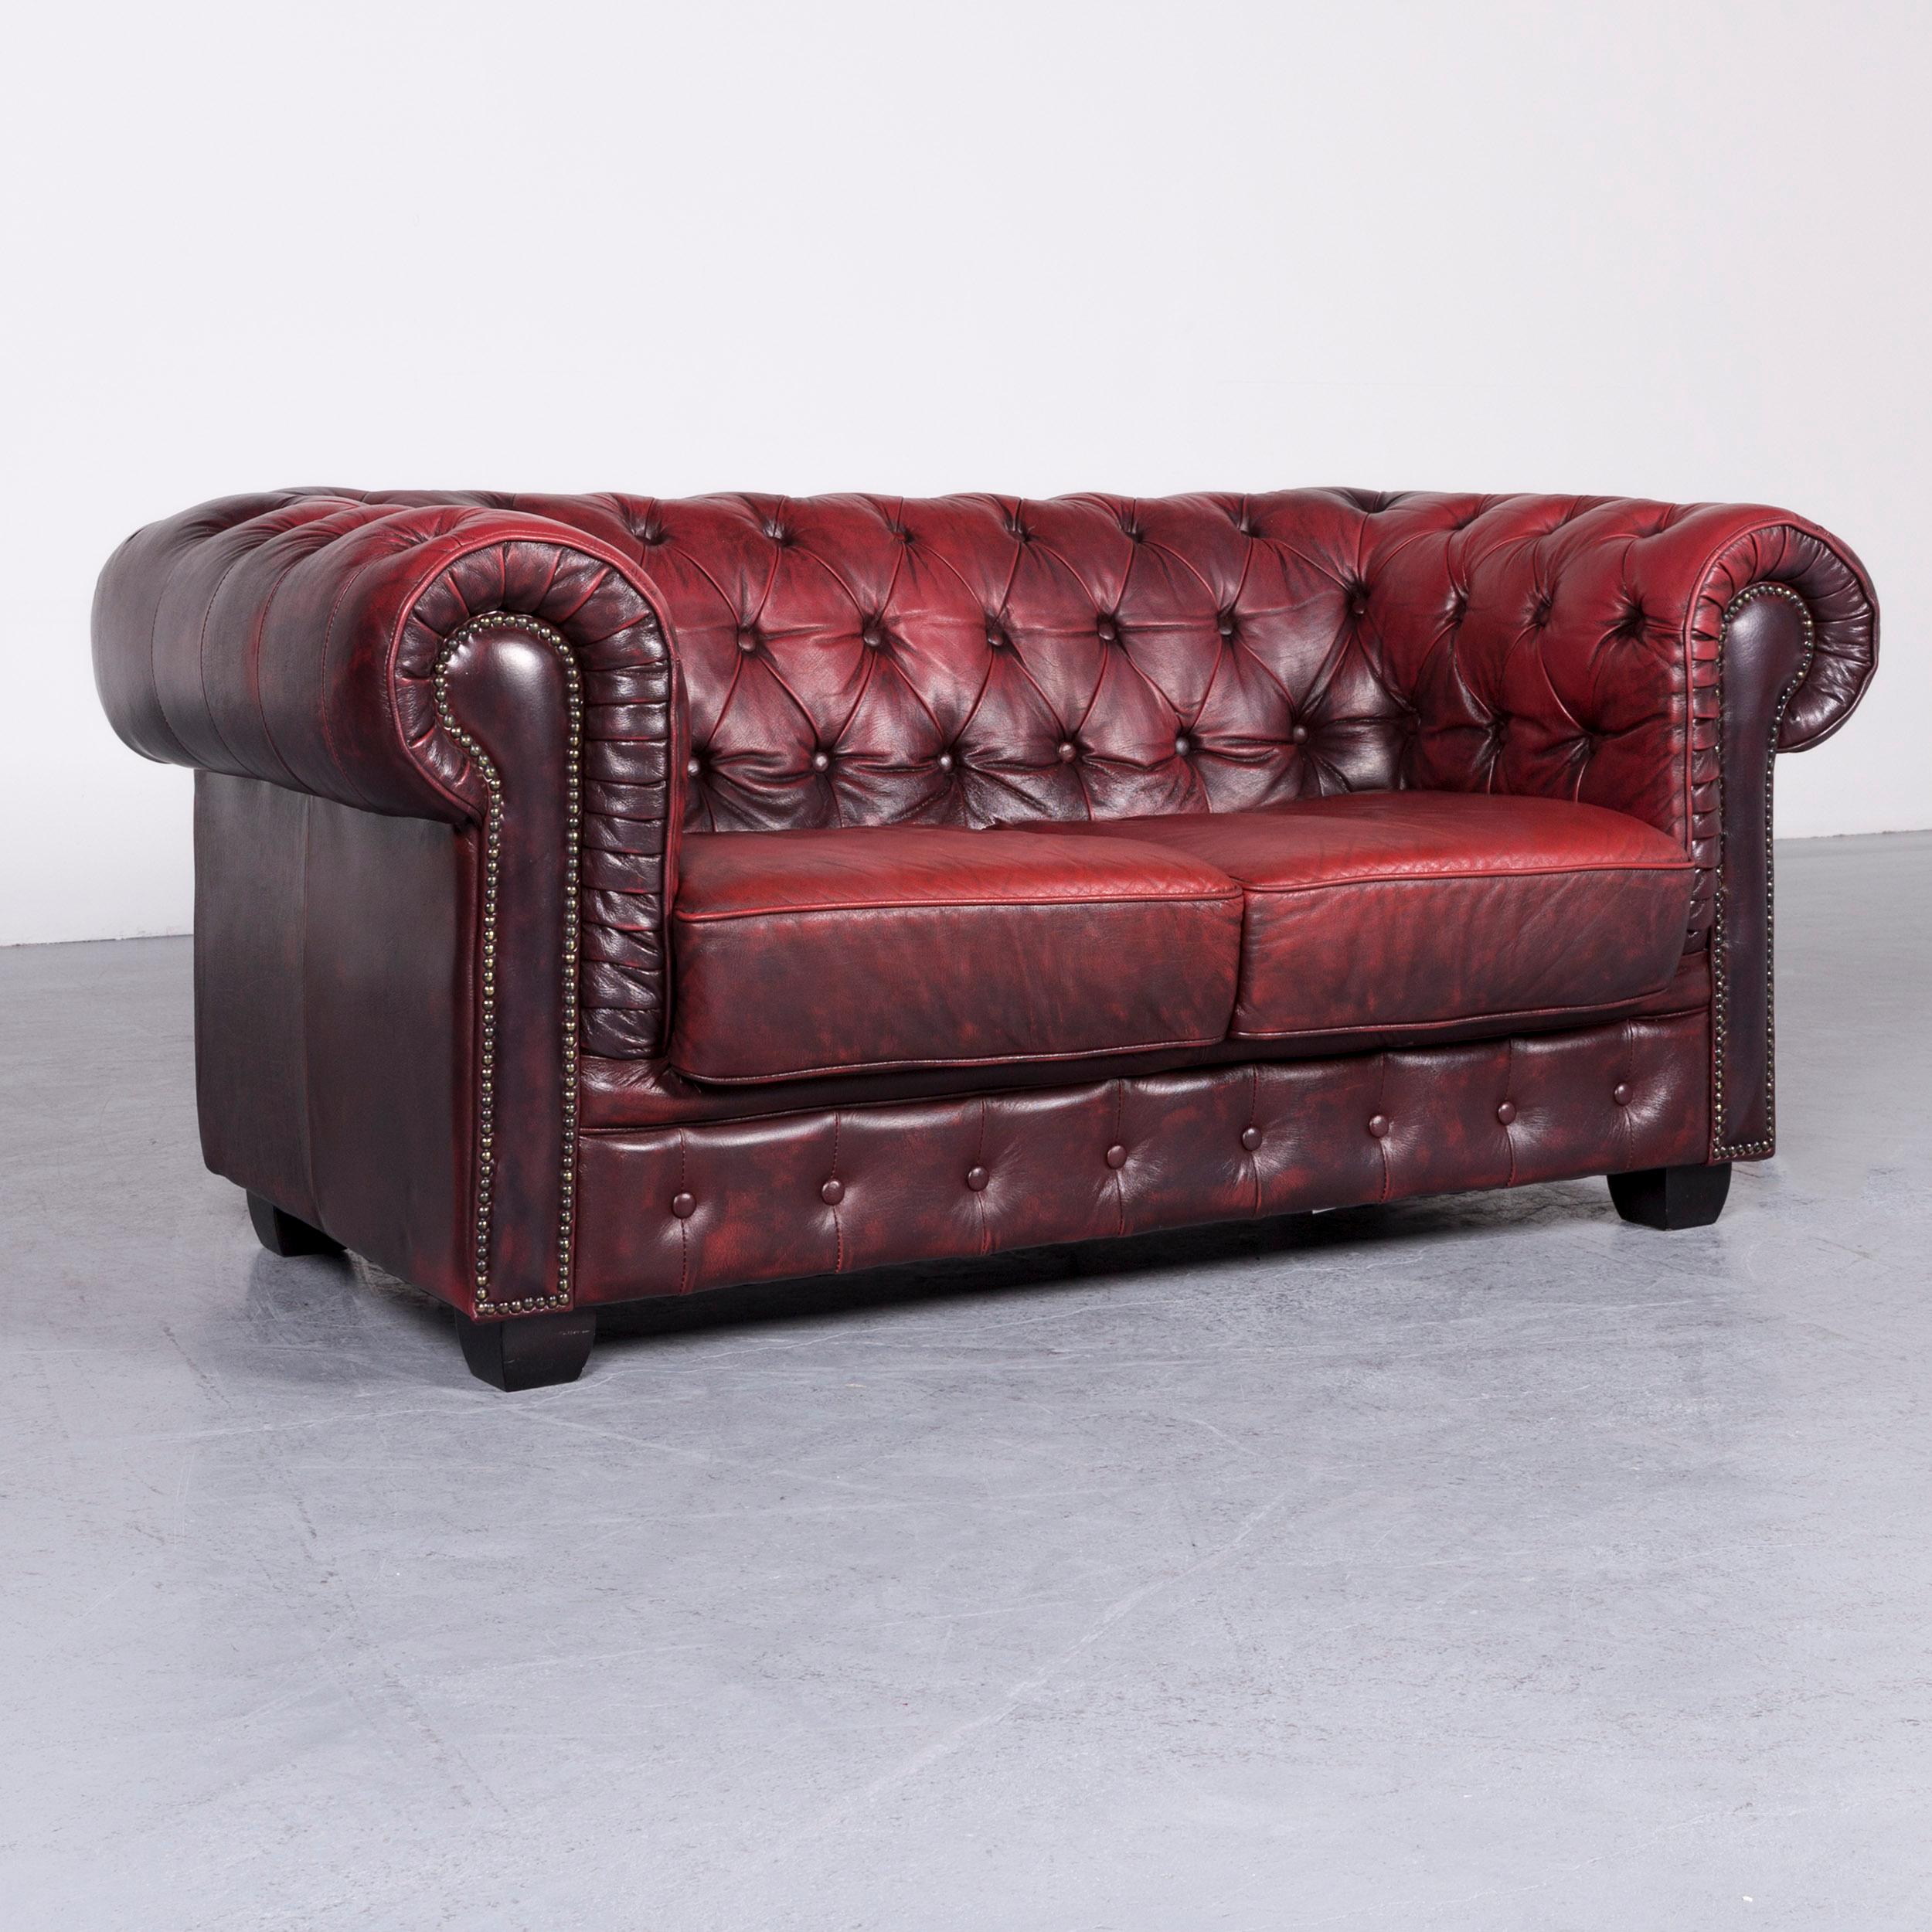 British Chesterfield Leather Sofa Red Two-Seat Vintage Couch